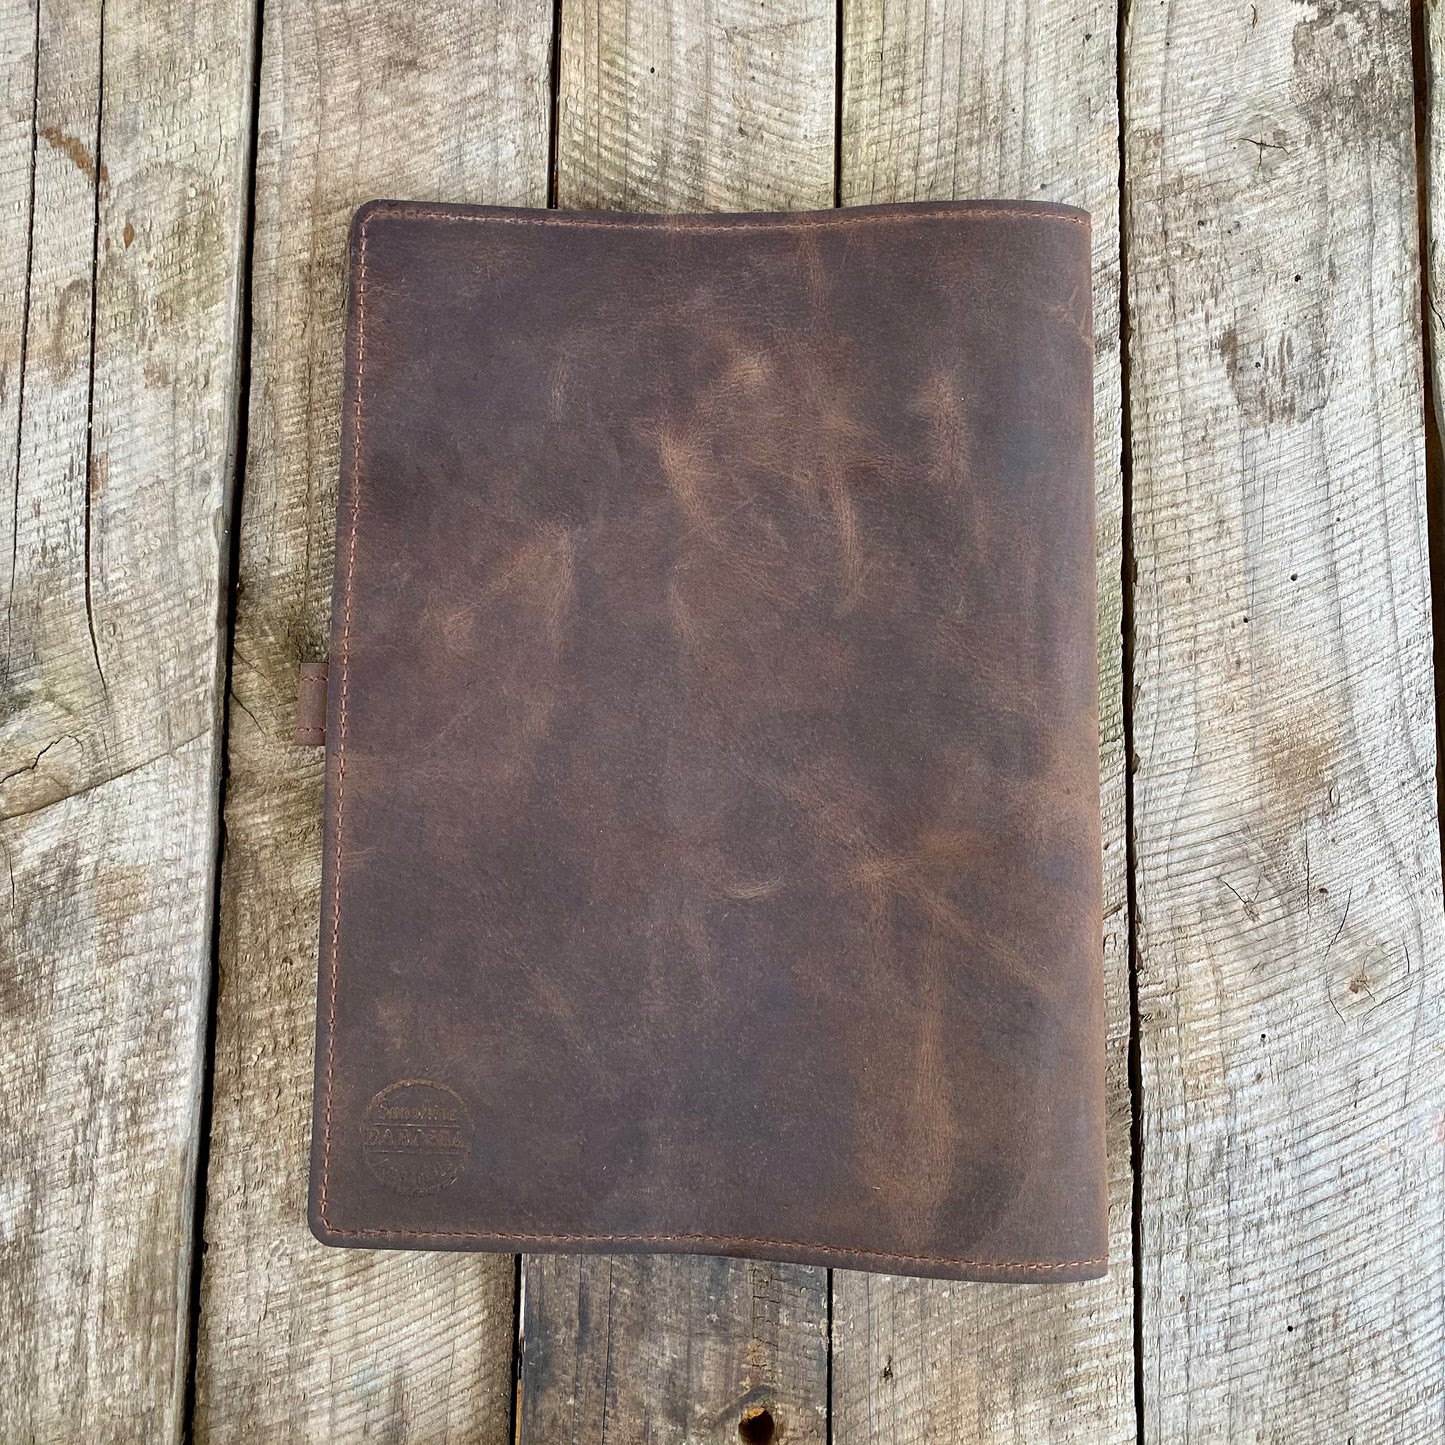 Leather Journal Cover / Compendium - A4